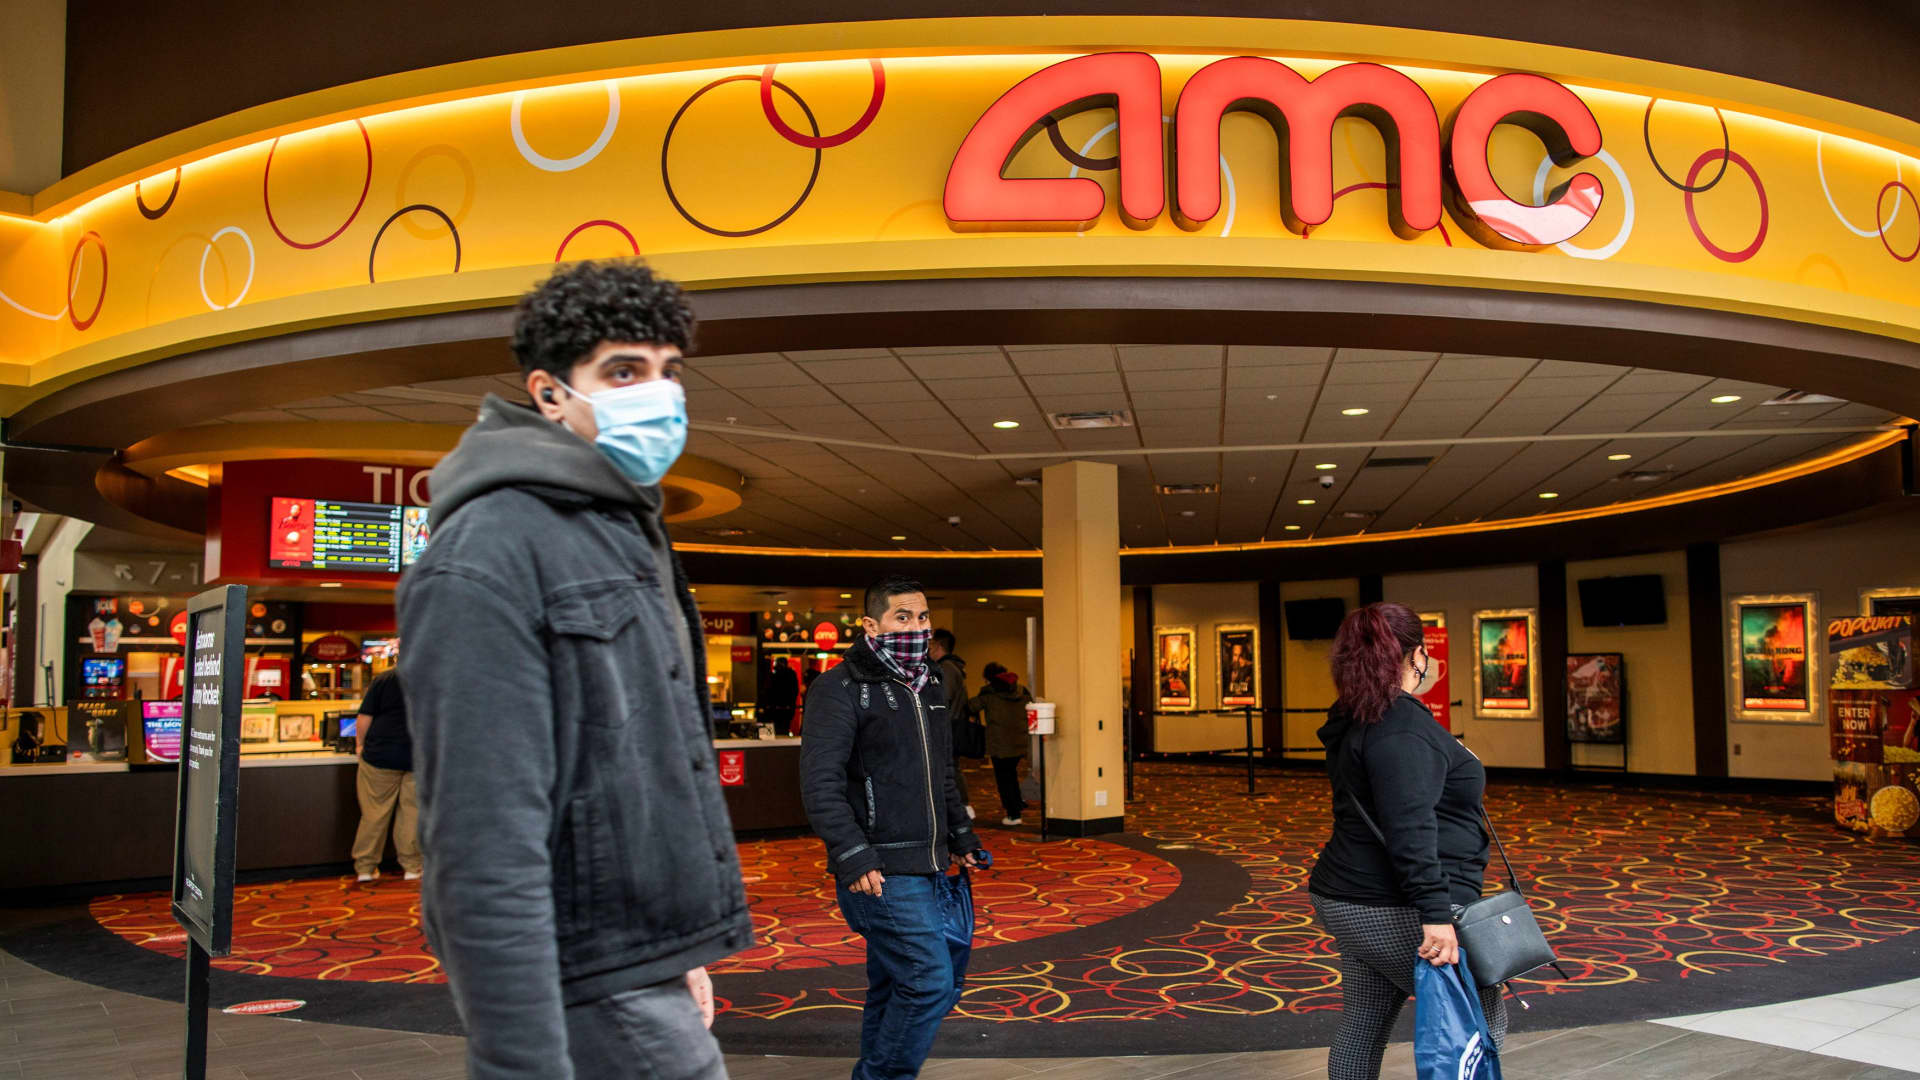 People wear face masks as they walk by a movie theater during the coronavirus disease (COVID-19) pandemic in Newport, New Jersey, April 2, 2021.